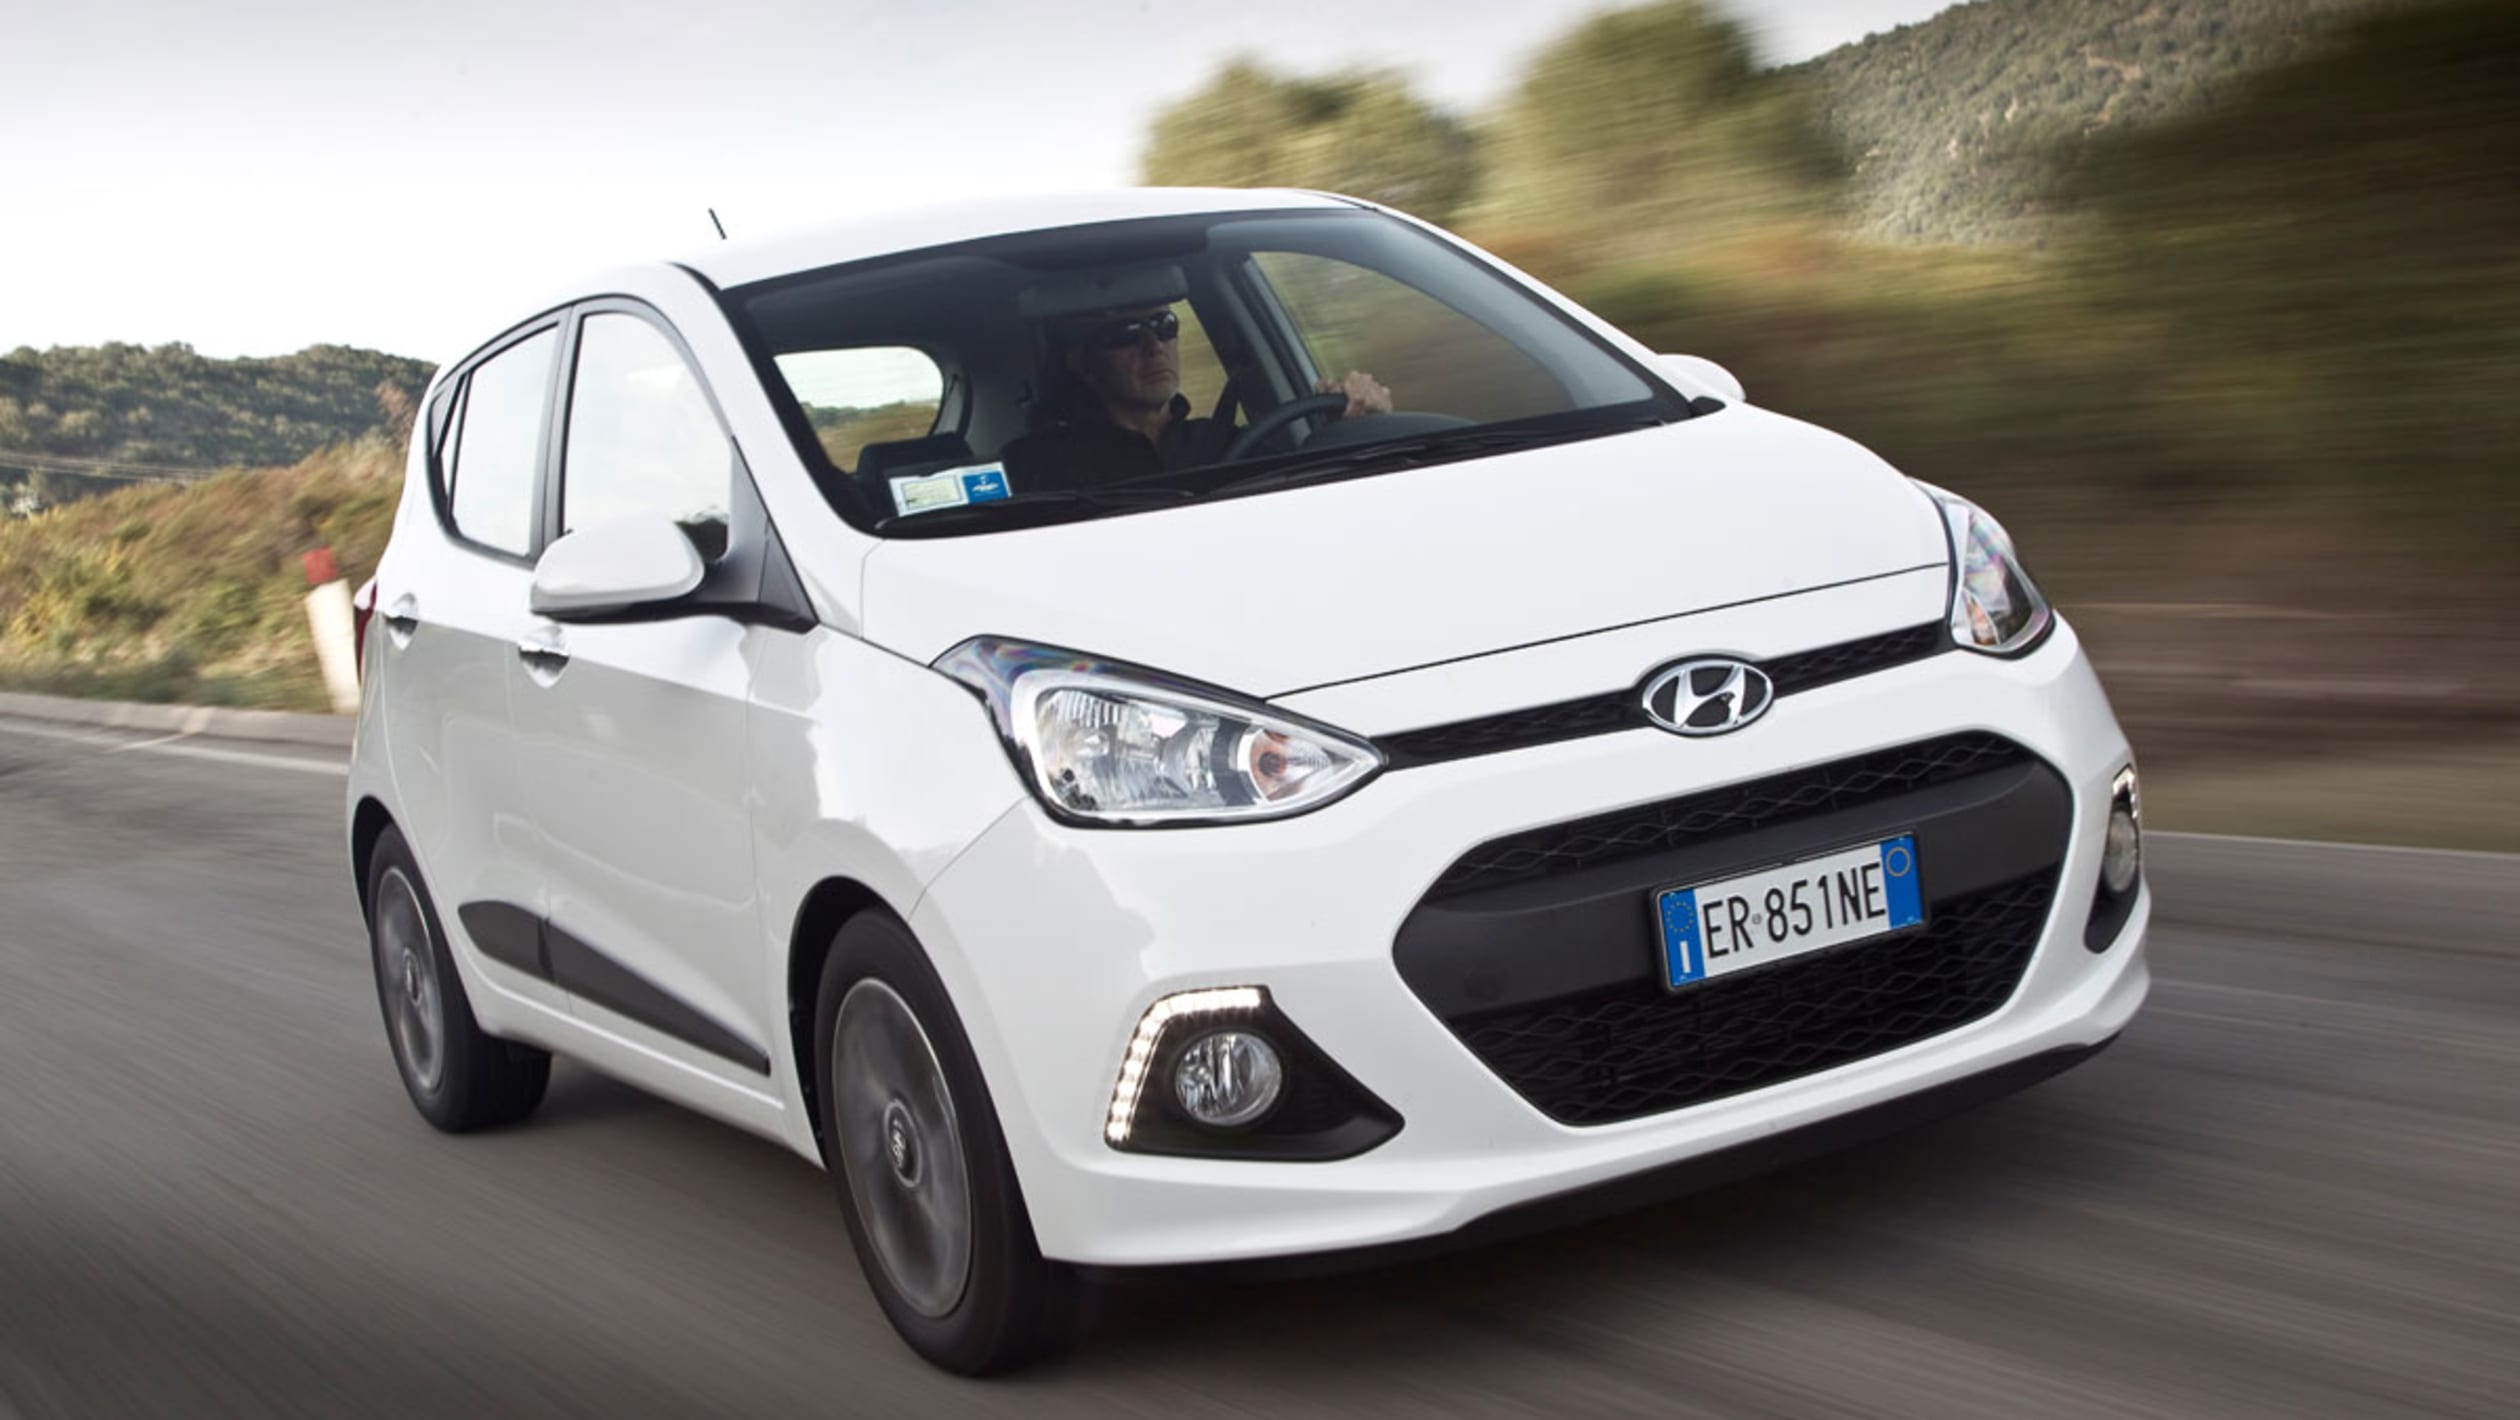 Hyundai i10 2014 review pictures | Auto Express